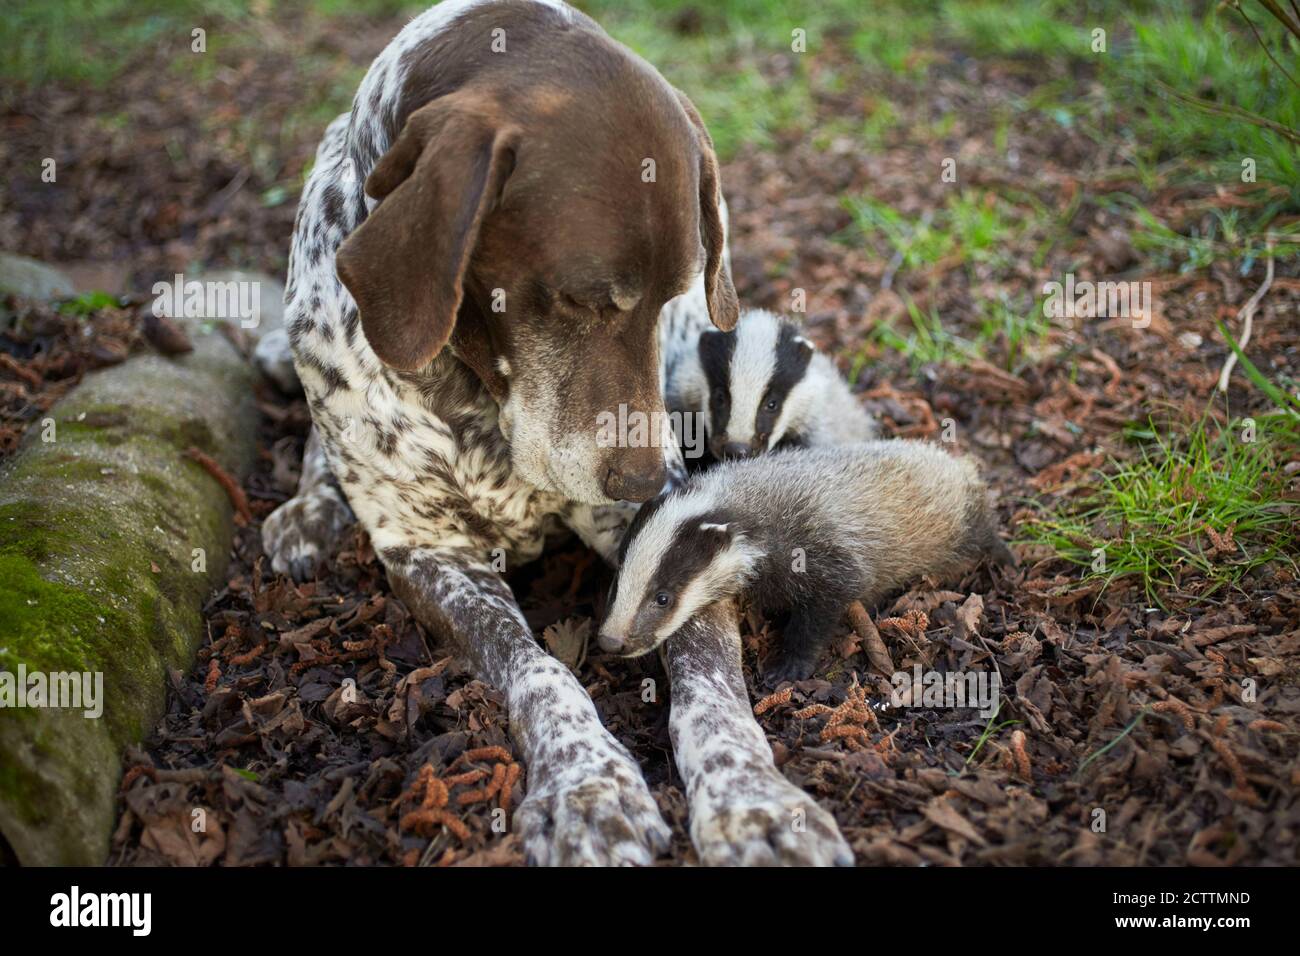 Animal friends: European Badger (Meles meles) and Domestic Dog. Adult German Shorthaired Pointer and young badgers. Stock Photo